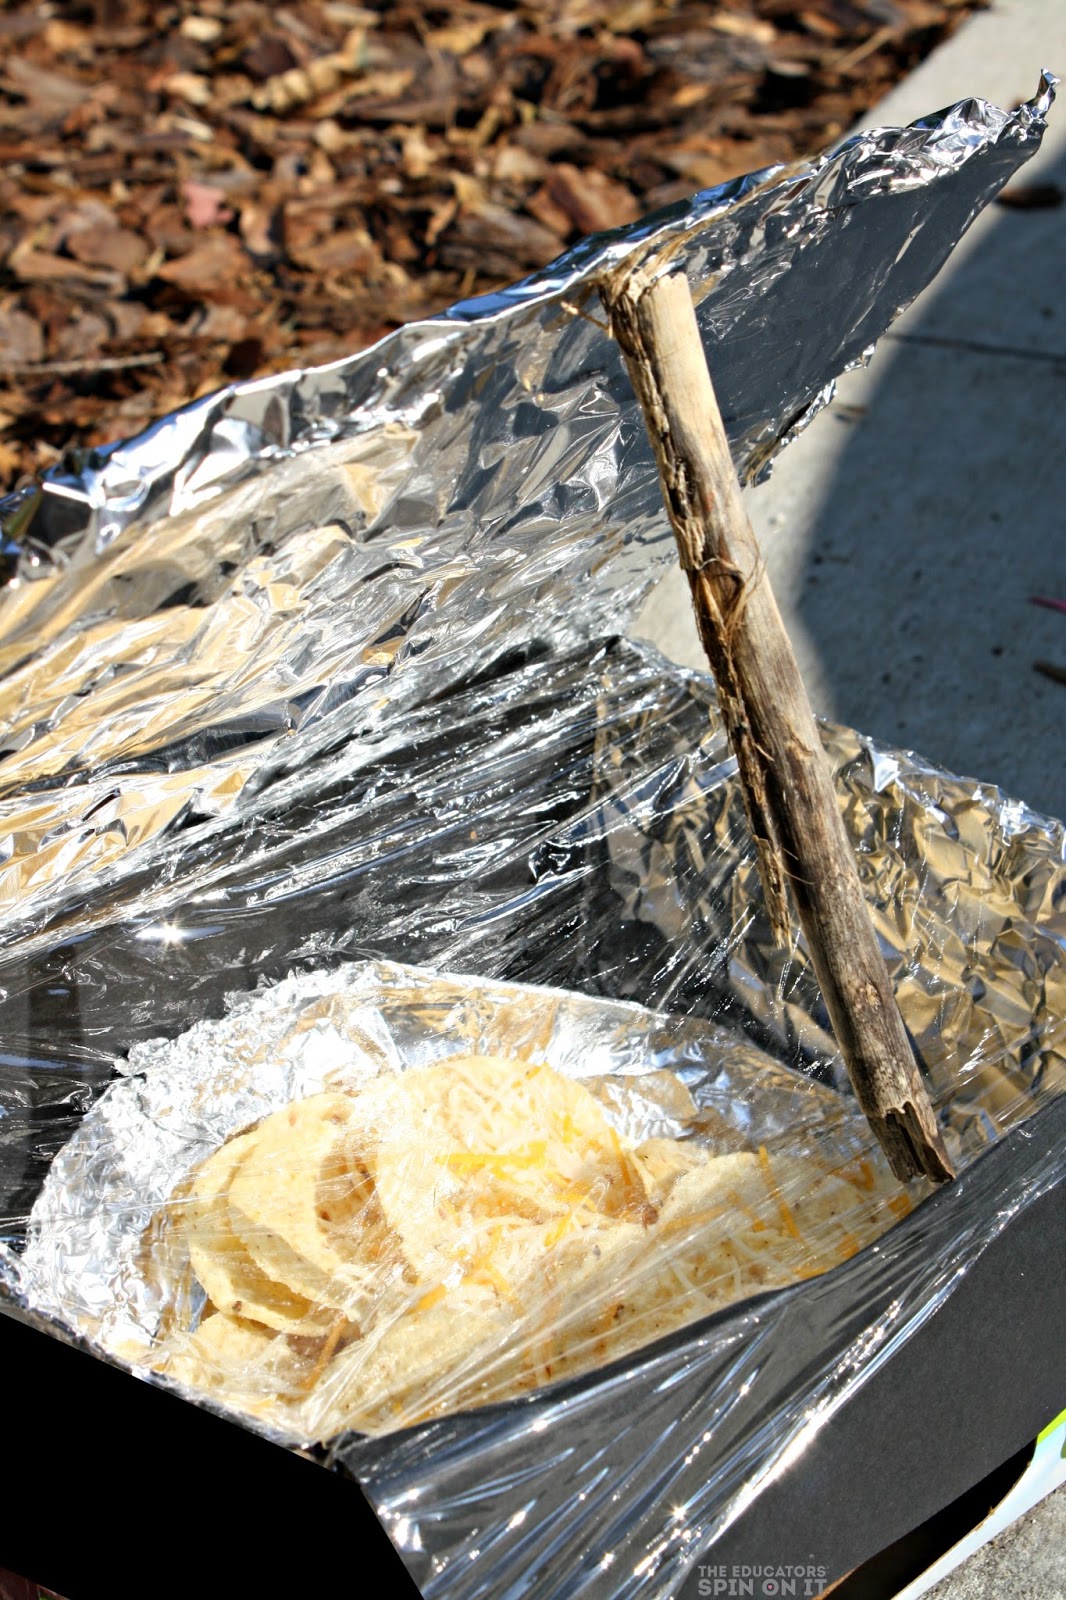 Solar Oven; Science experiments for kids #EDUSpin #science